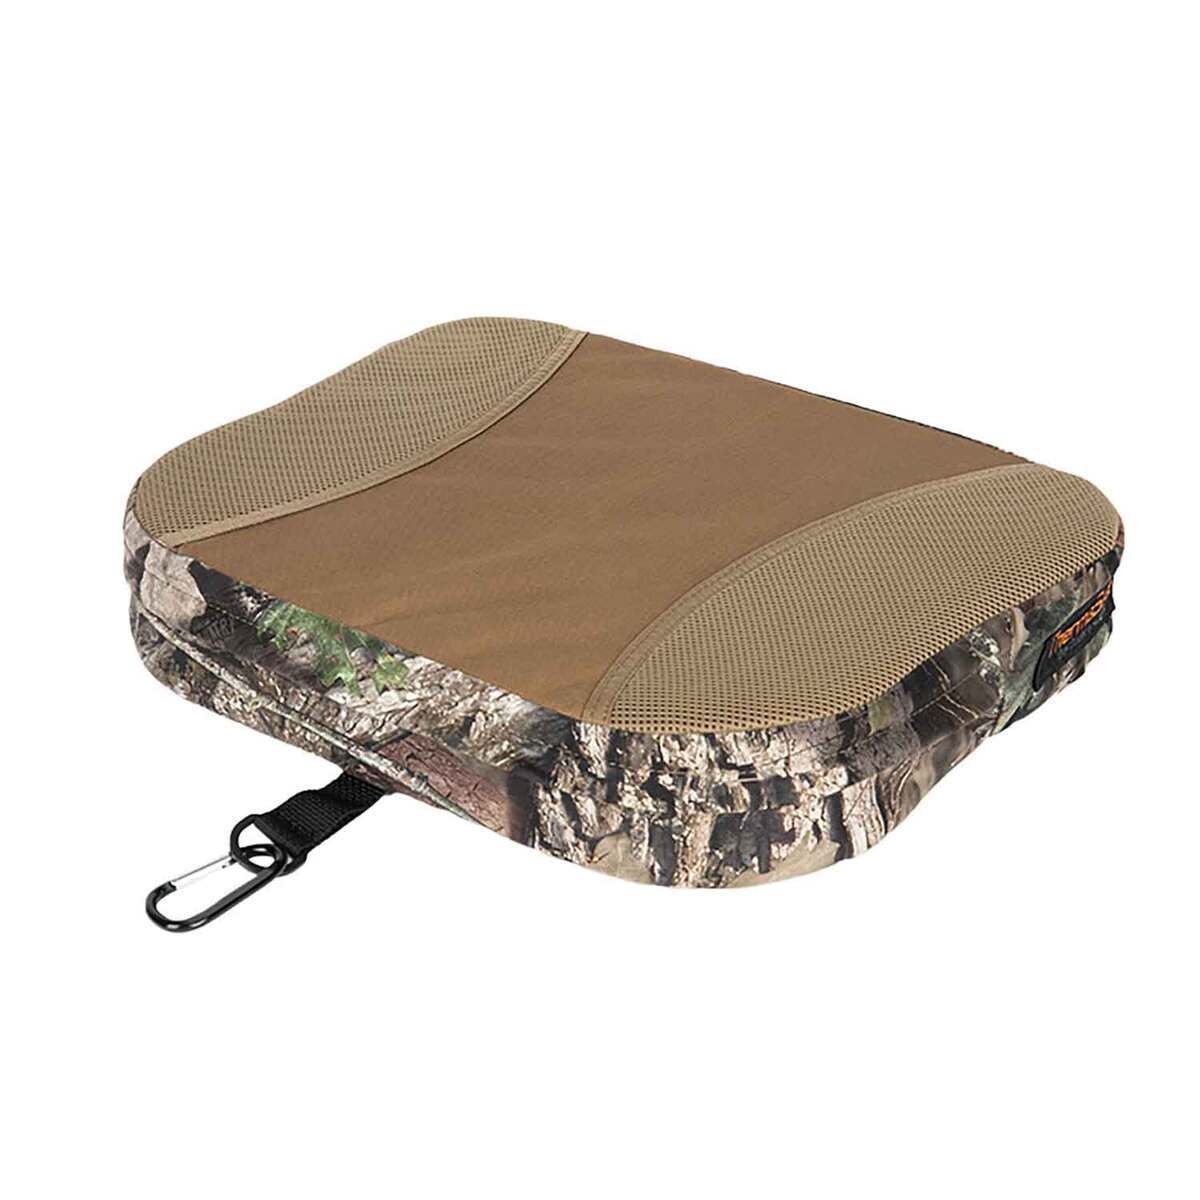 Thermaseat Infusion Mossy Oak Cushion - Large